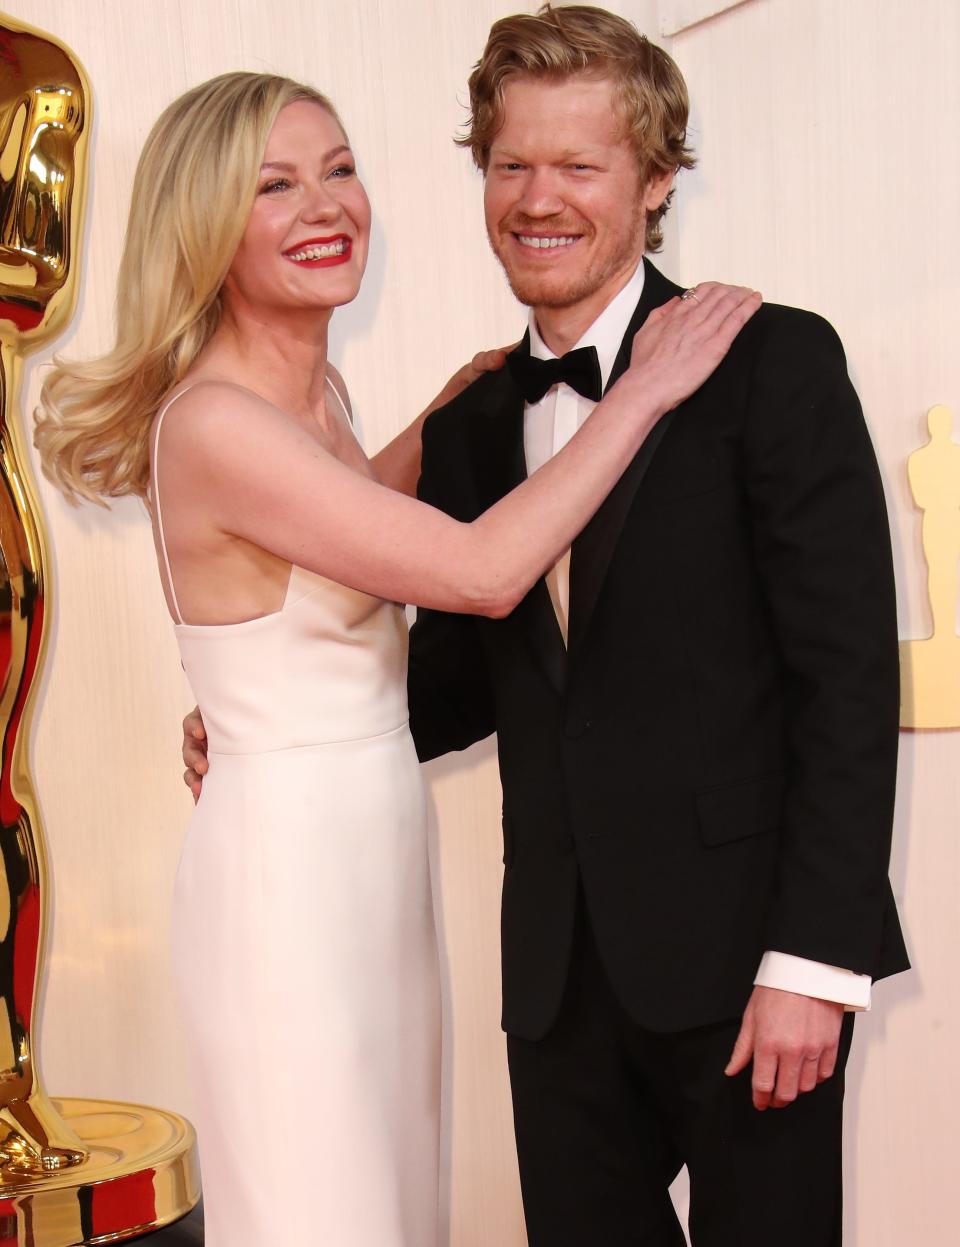 Kirsten Dunst, left, and Jesse Plemons at the Academy Awards in Hollywood last month.